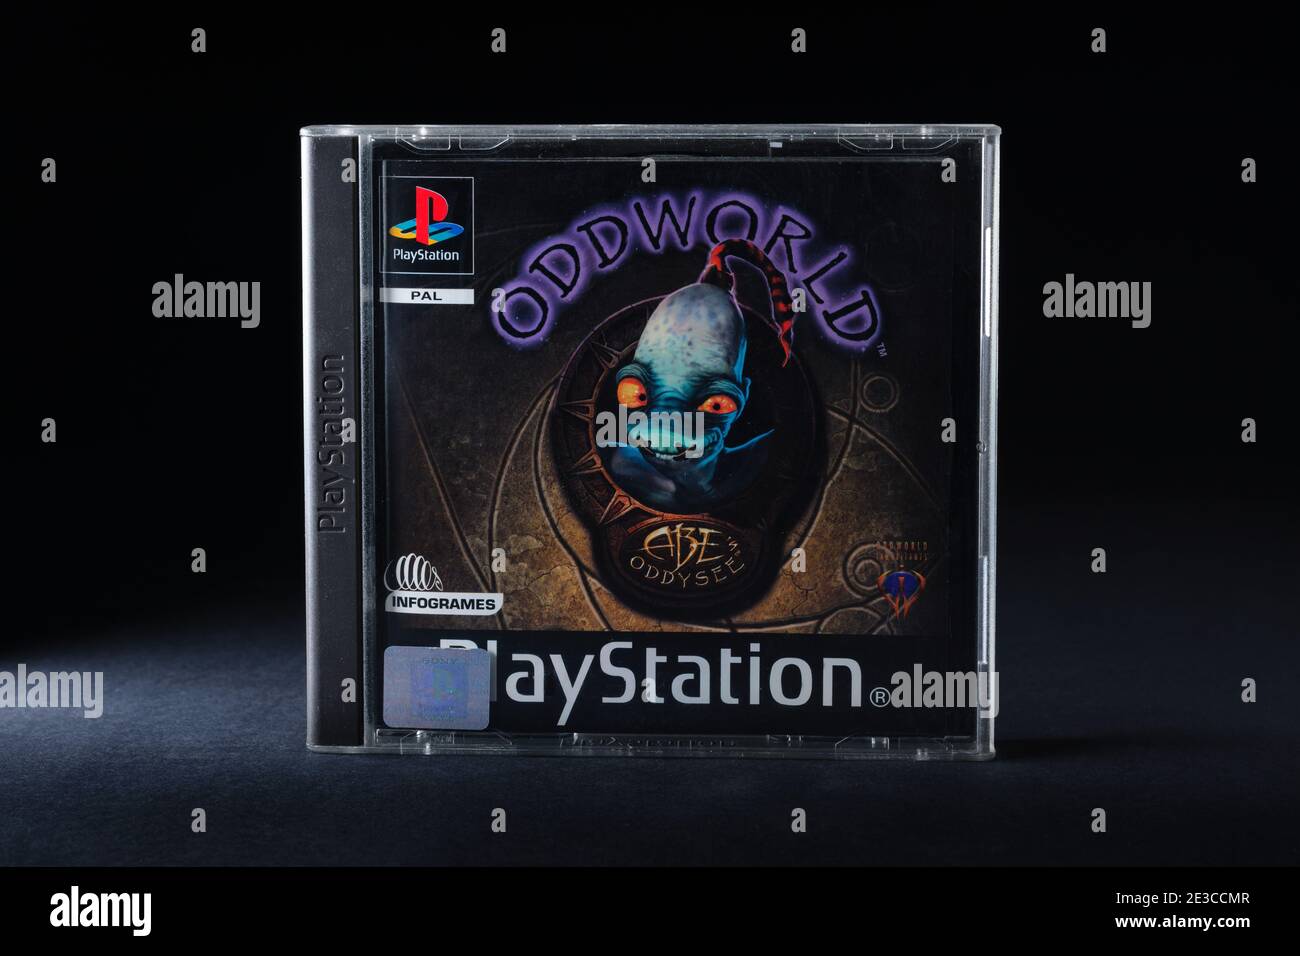 Original Oddworld Abe's Oddysee Playstation One game developed by Oddworld Inhabitants Incorporated and published by GT Interactive in 1997 Stock Photo